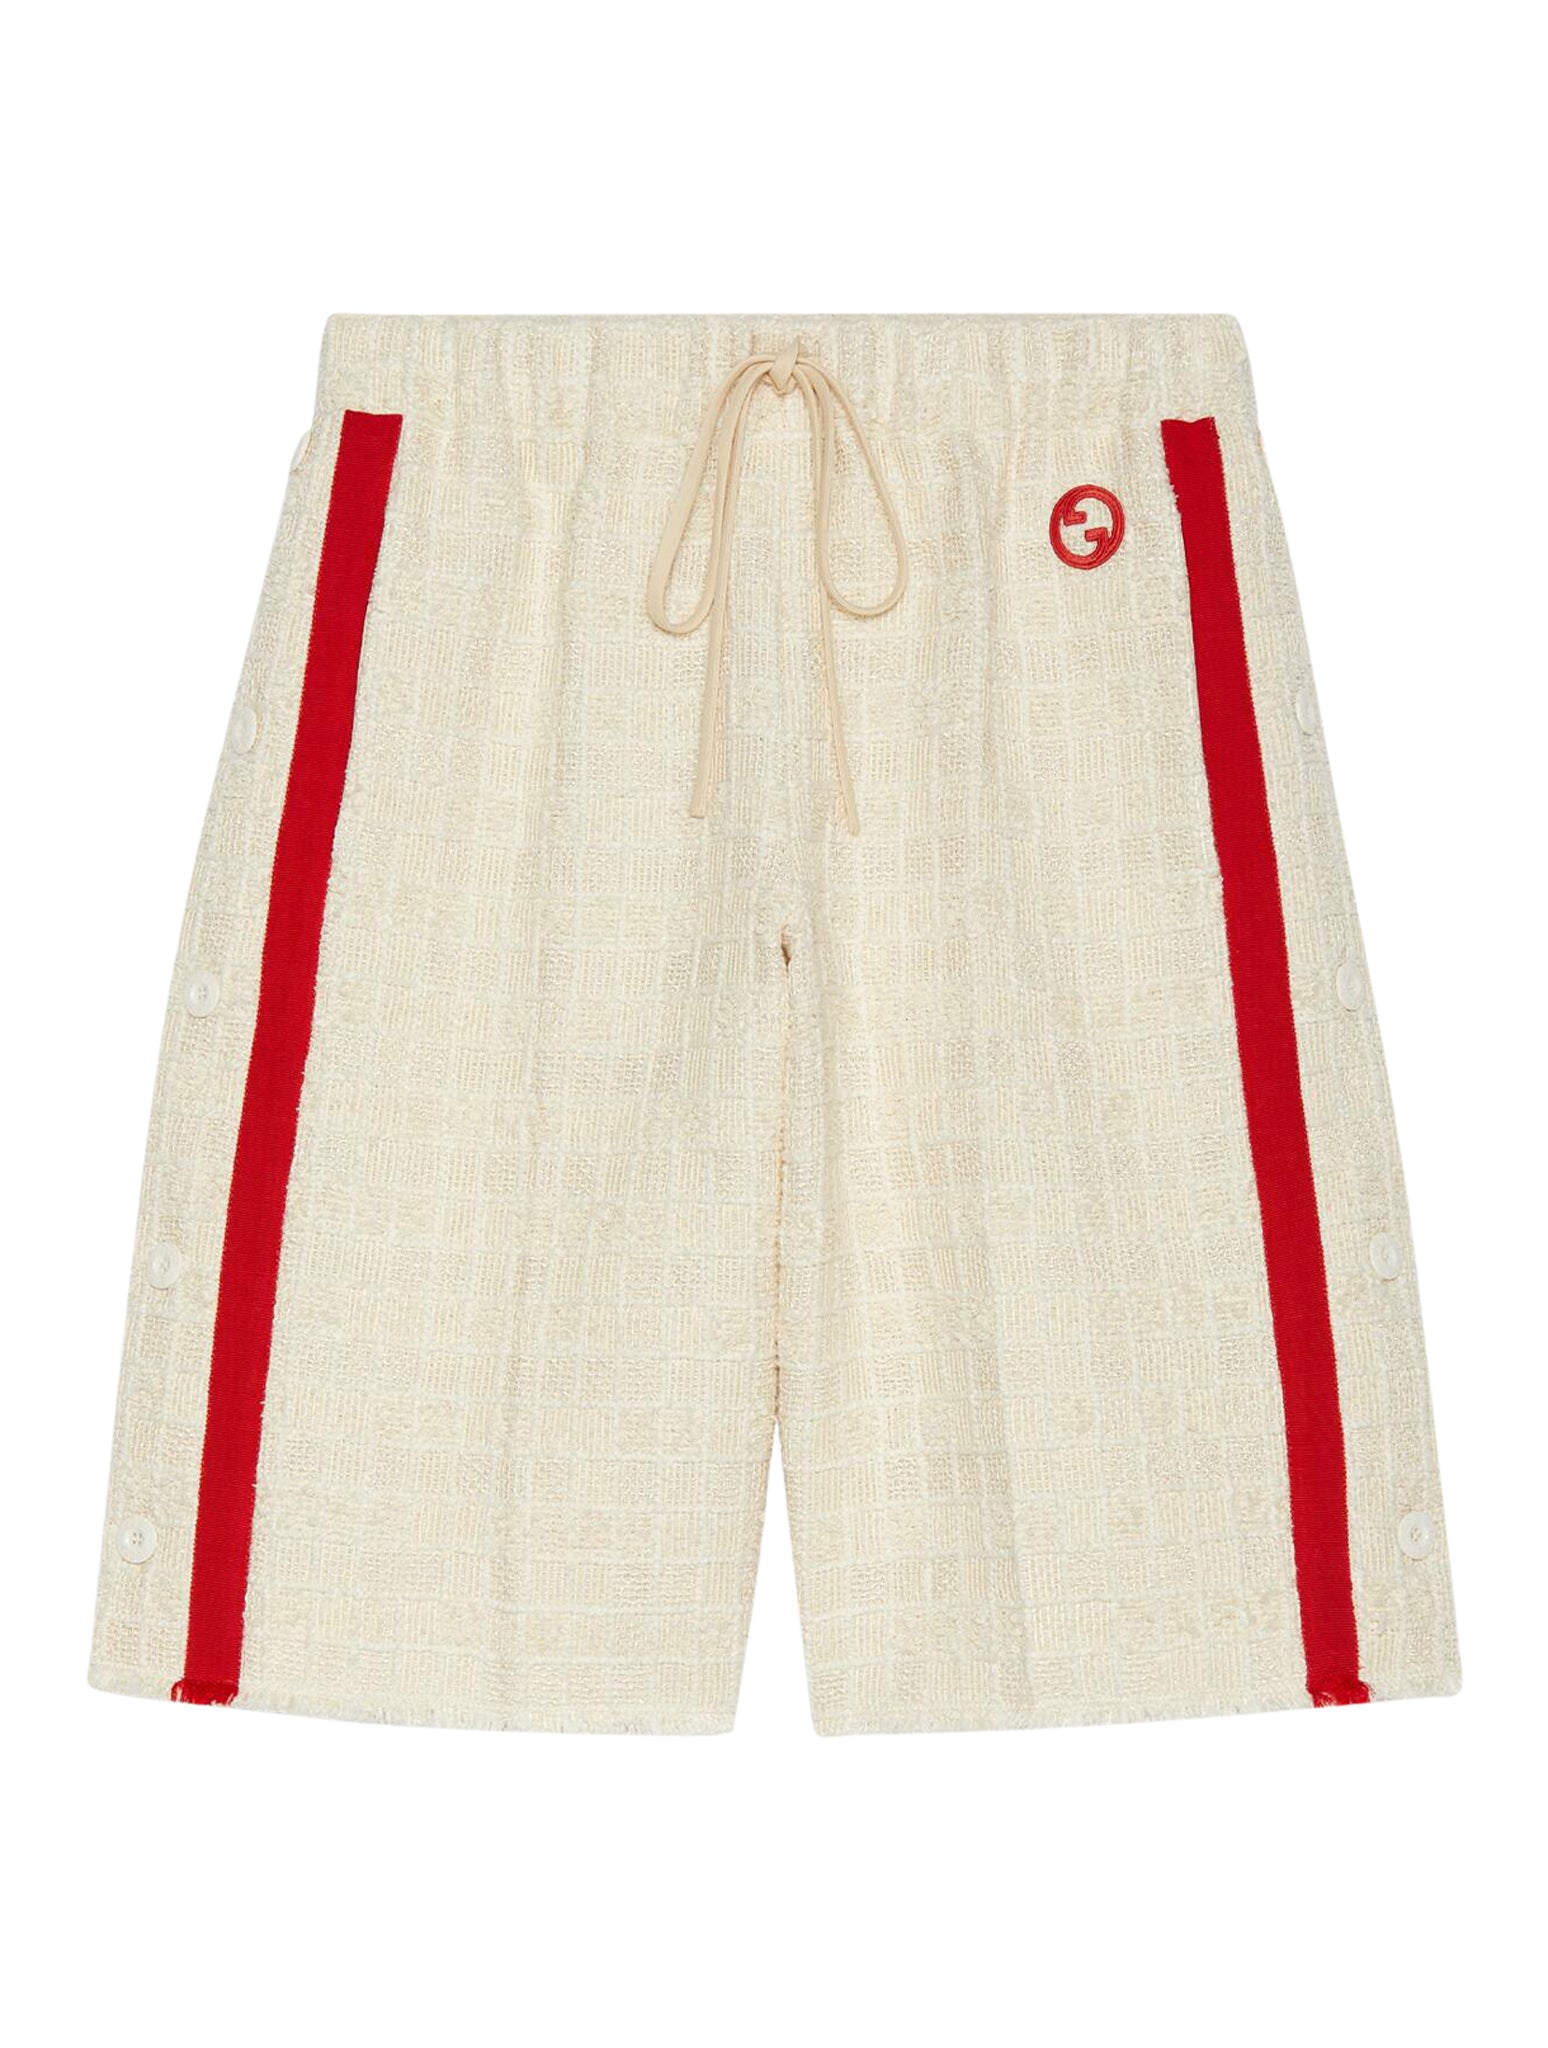 SHORTS IN COTTON TWILL WITH PATCH